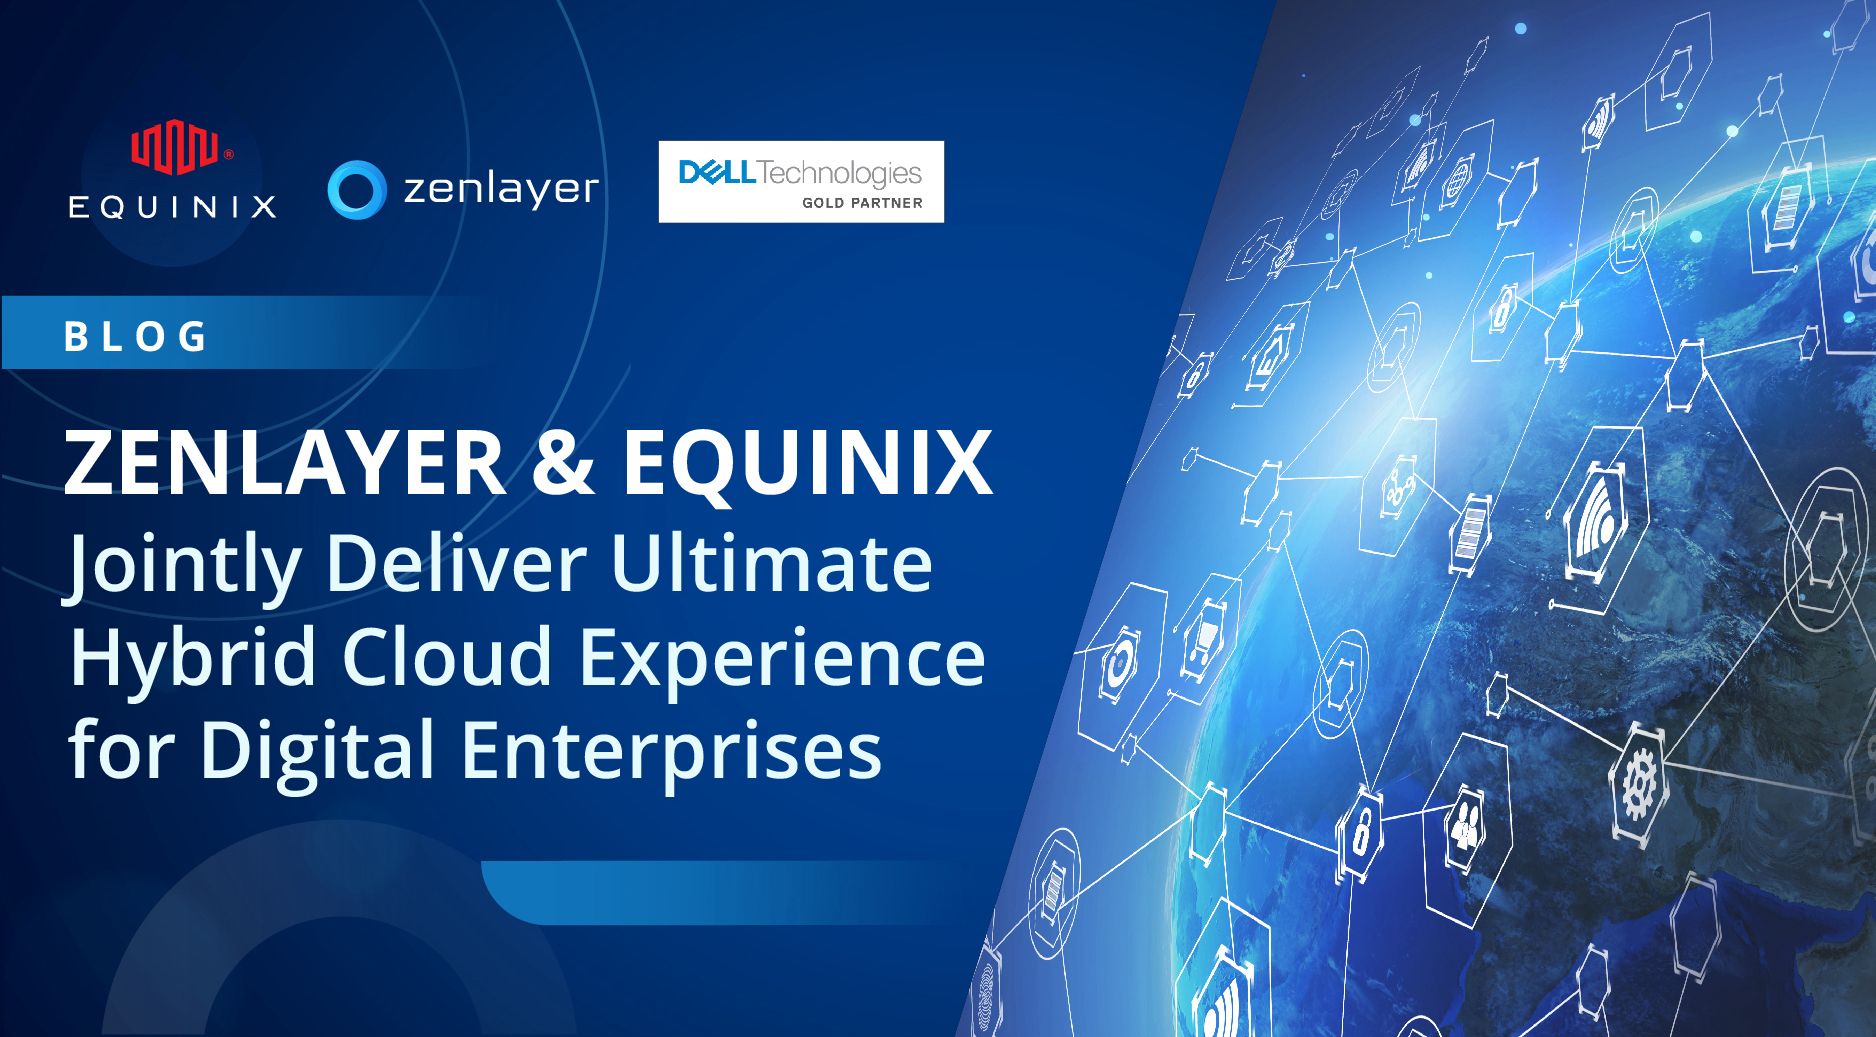 Zenlayer and Equinix Jointly Deliver Ultimate Hybrid Multi-Cloud Experience for Digital Enterprises 